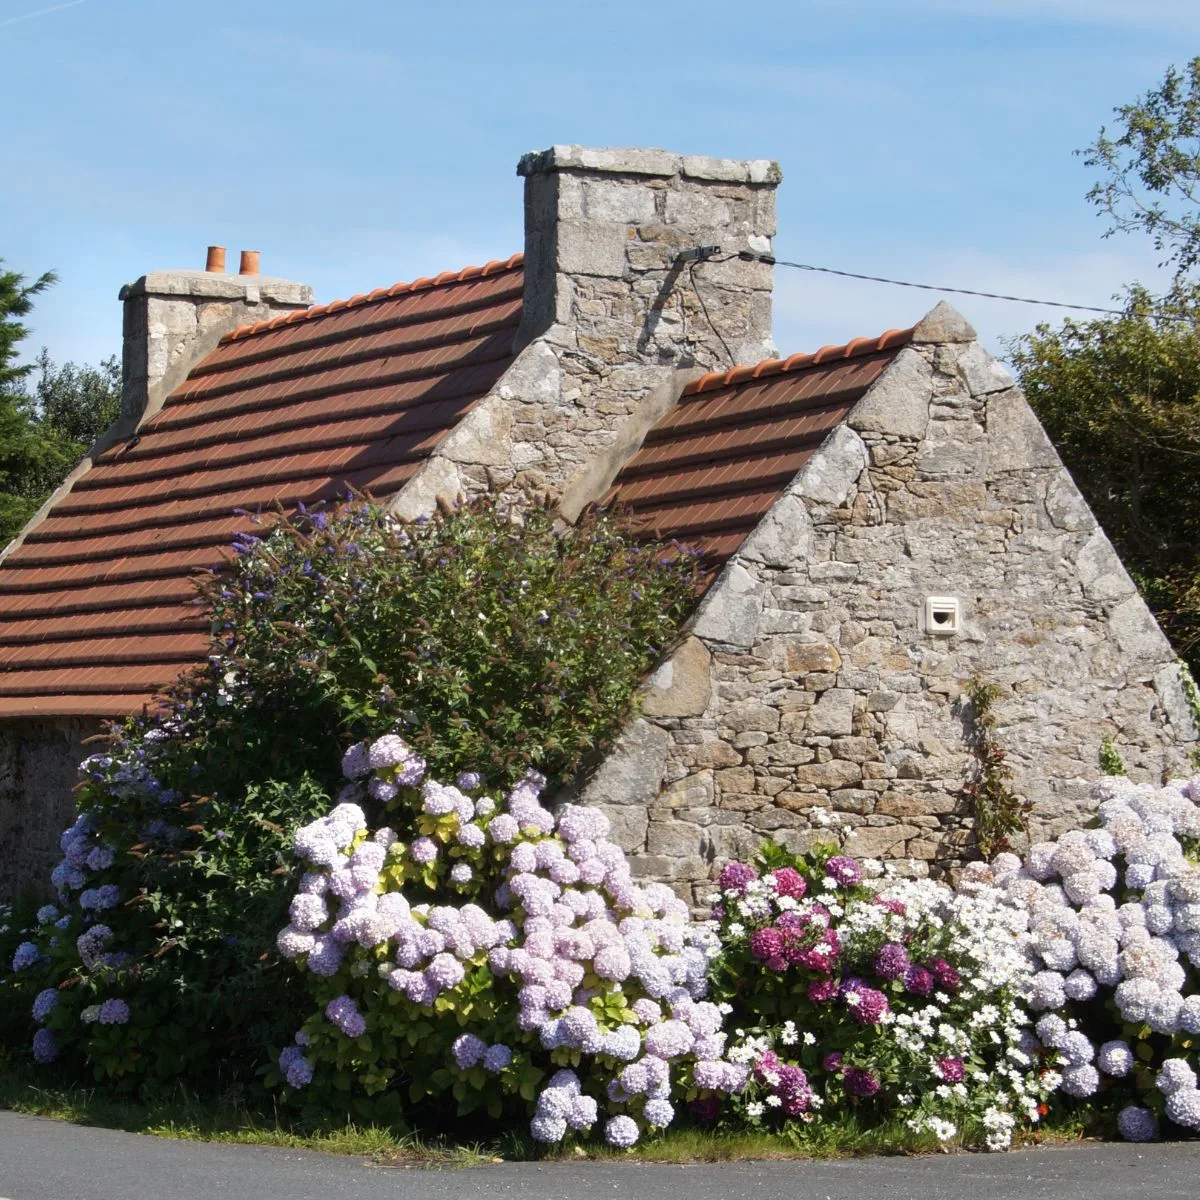 Mass planting of hydrangeas on the side wall of a stone house. 